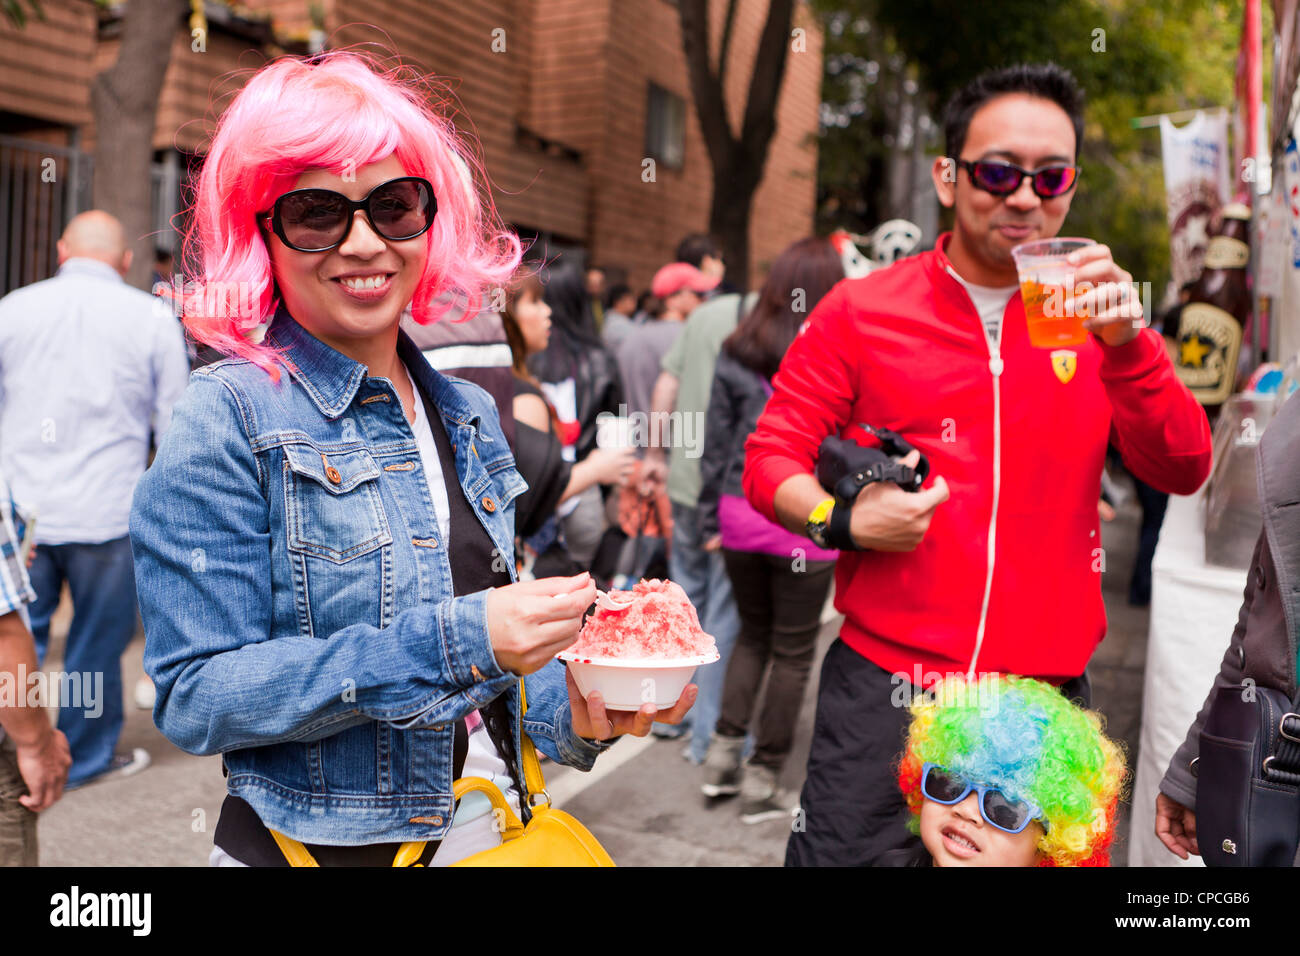 An Asian woman wearing a pink wig at an outdoor festival Stock Photo